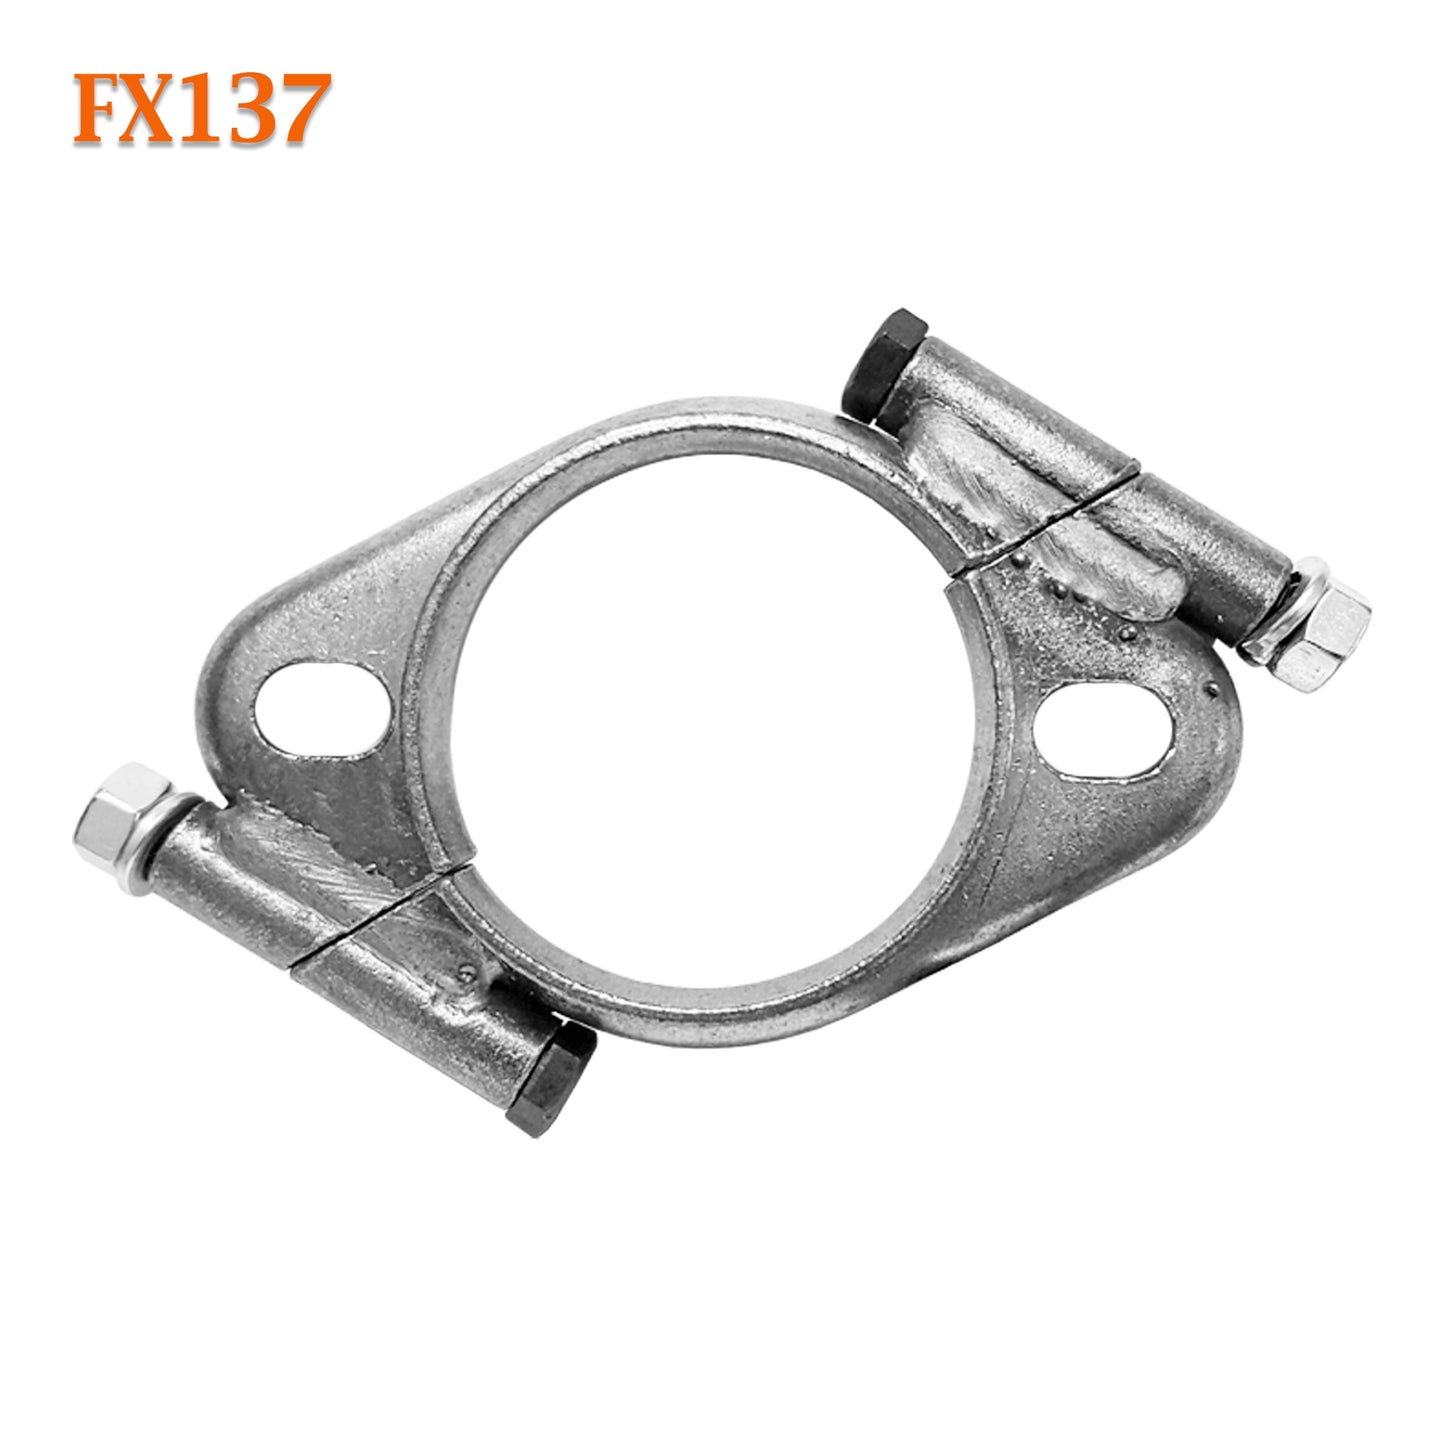 FX137 2 1/2" ID Exhaust Flange Formed Oval Angle Split For 2 1/4" OD Flared Pipe